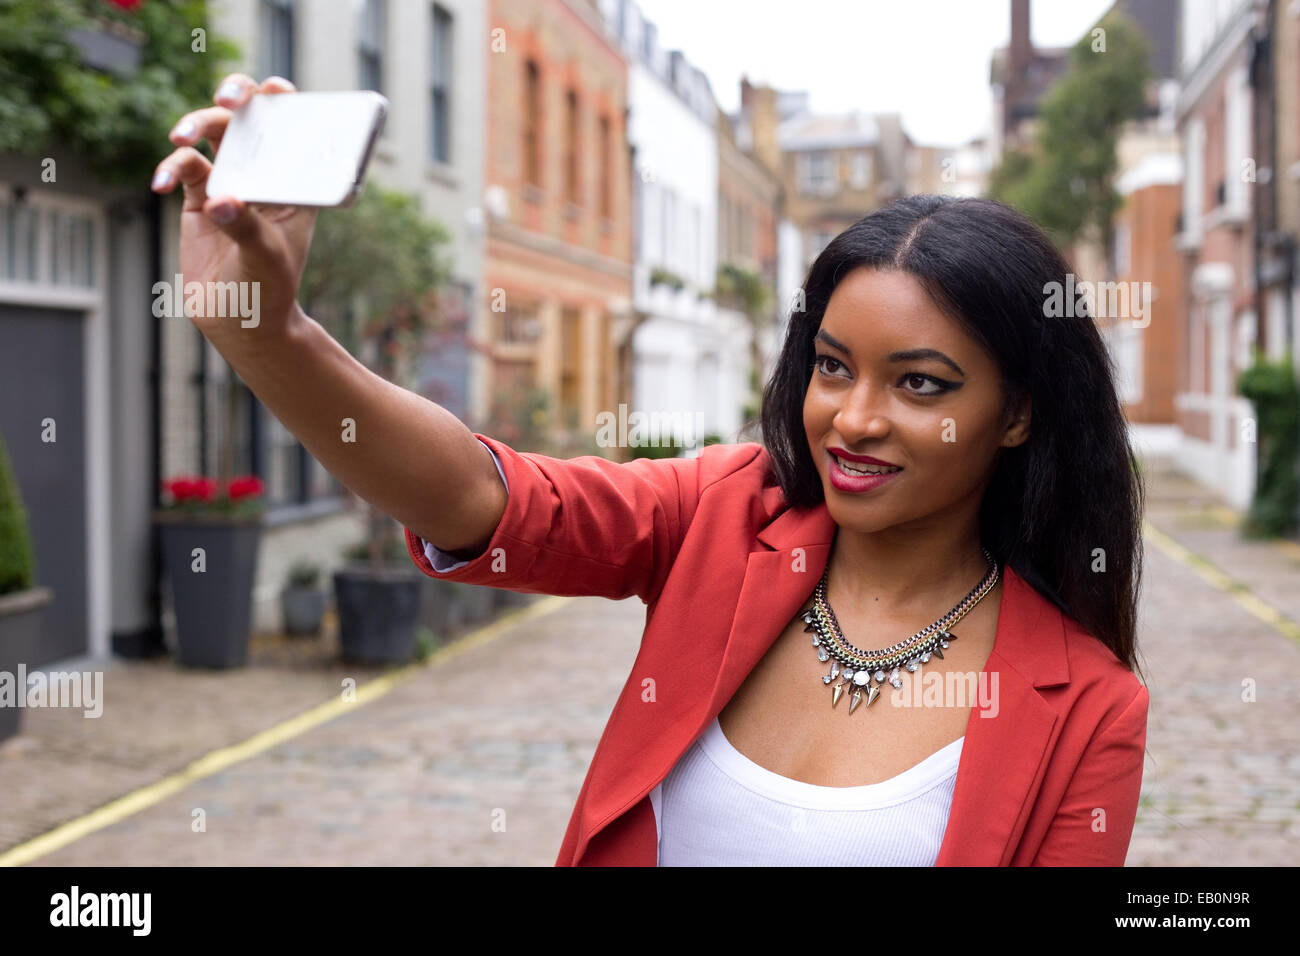 young woman taking a selfie Stock Photo